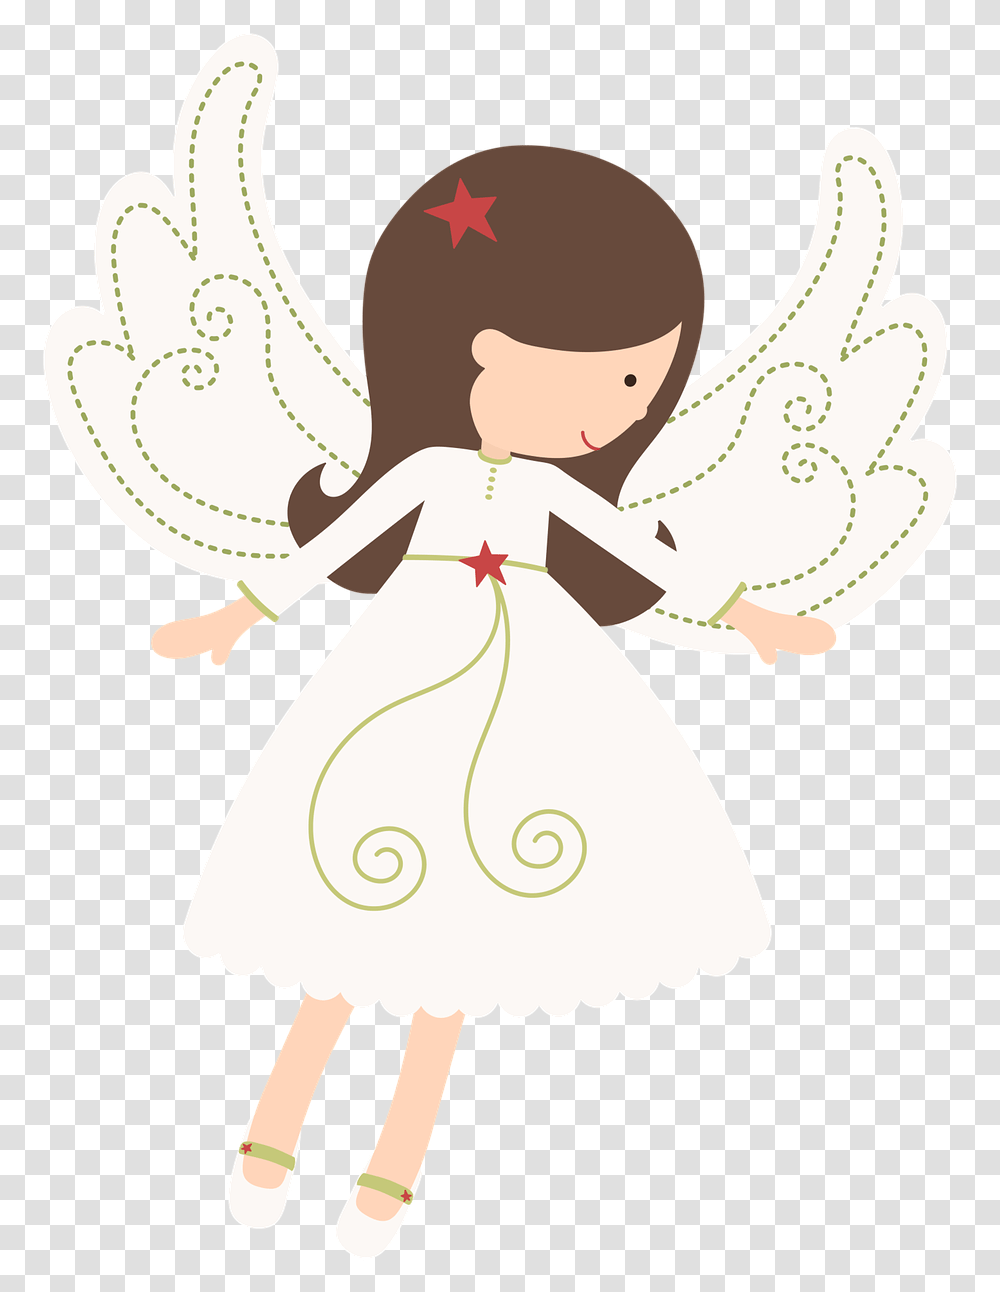 Angel Christmas Decoration Picpng Christmas Angels Decoration, Art, Archangel, Cupid Transparent Png